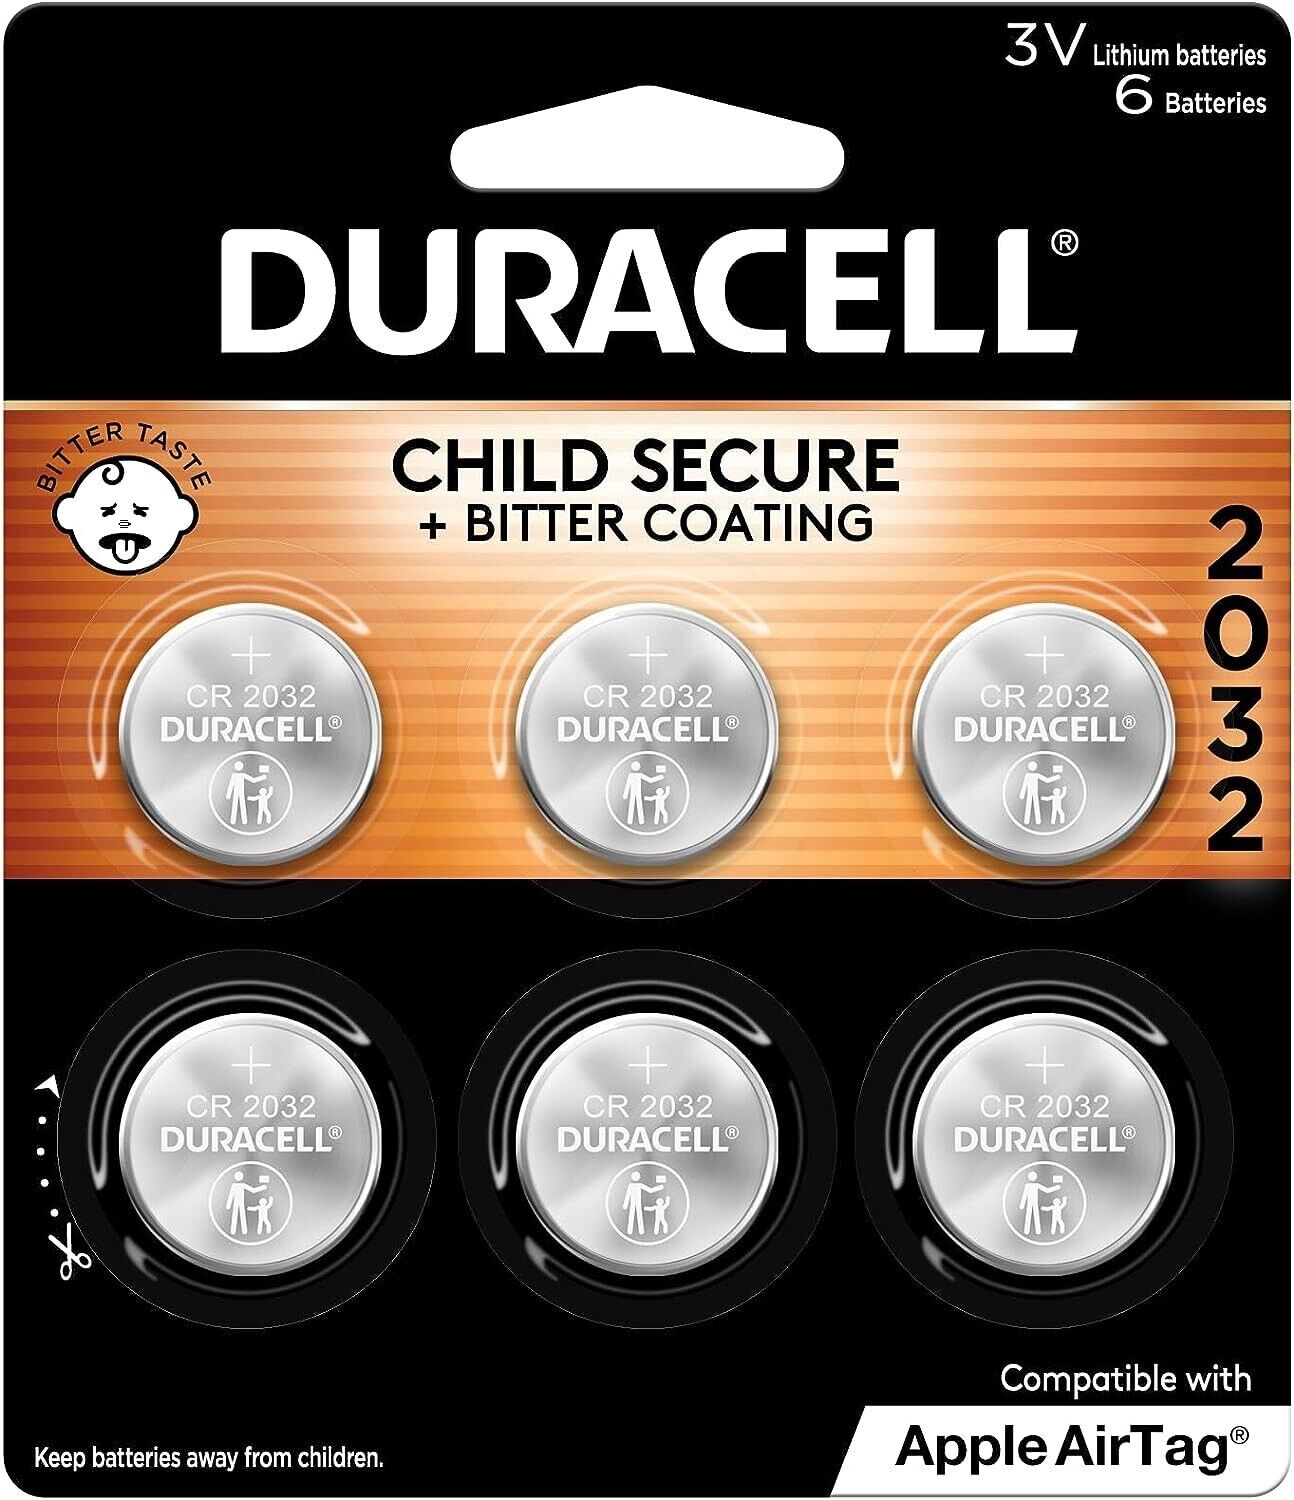 Duracell CR2032 3V Lithium Battery, Child Safety Features, 6 Count Pack, Lithium